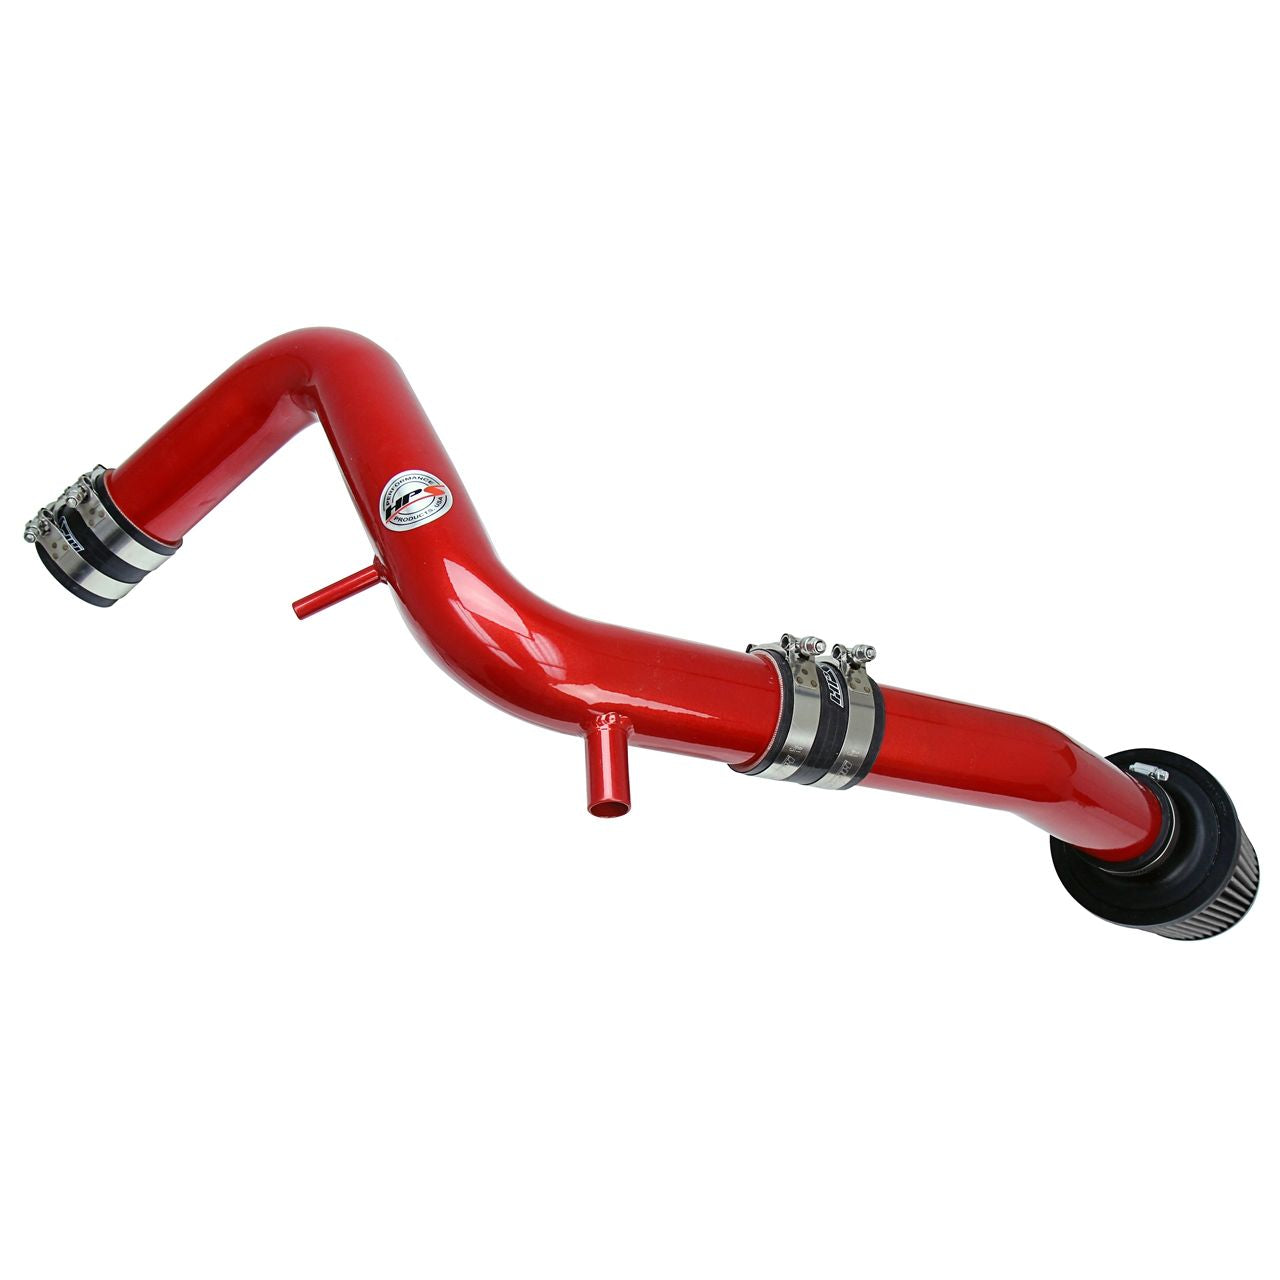 HPS Cold Air Intake Kit 13-17 Hyundai Veloster 1.6L Turbo, Converts to Shortram, Red